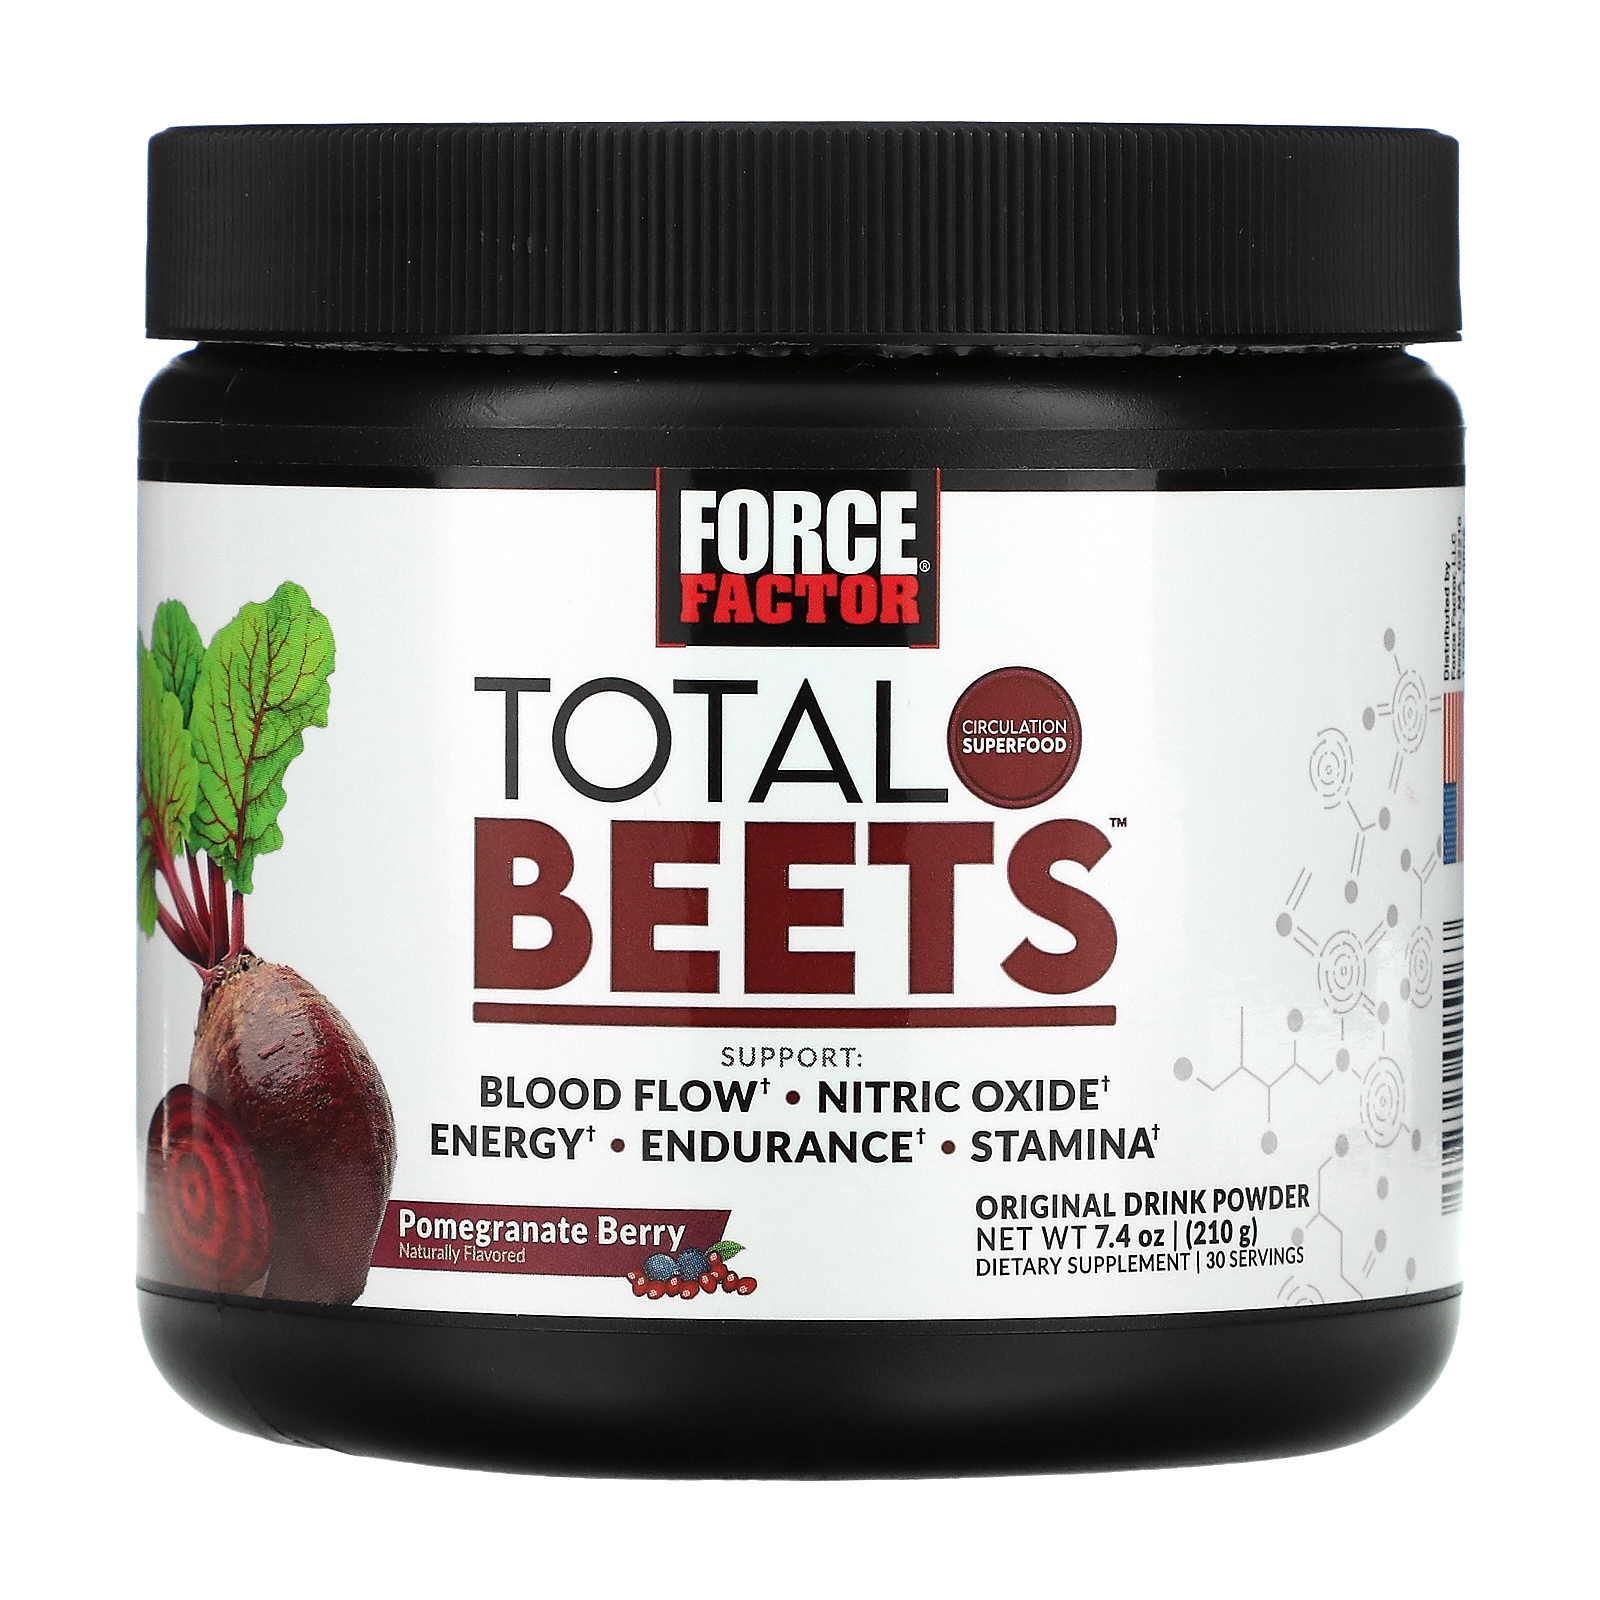 Force Factor, Total Drink Powder, Pomegranate Berry, oz (210